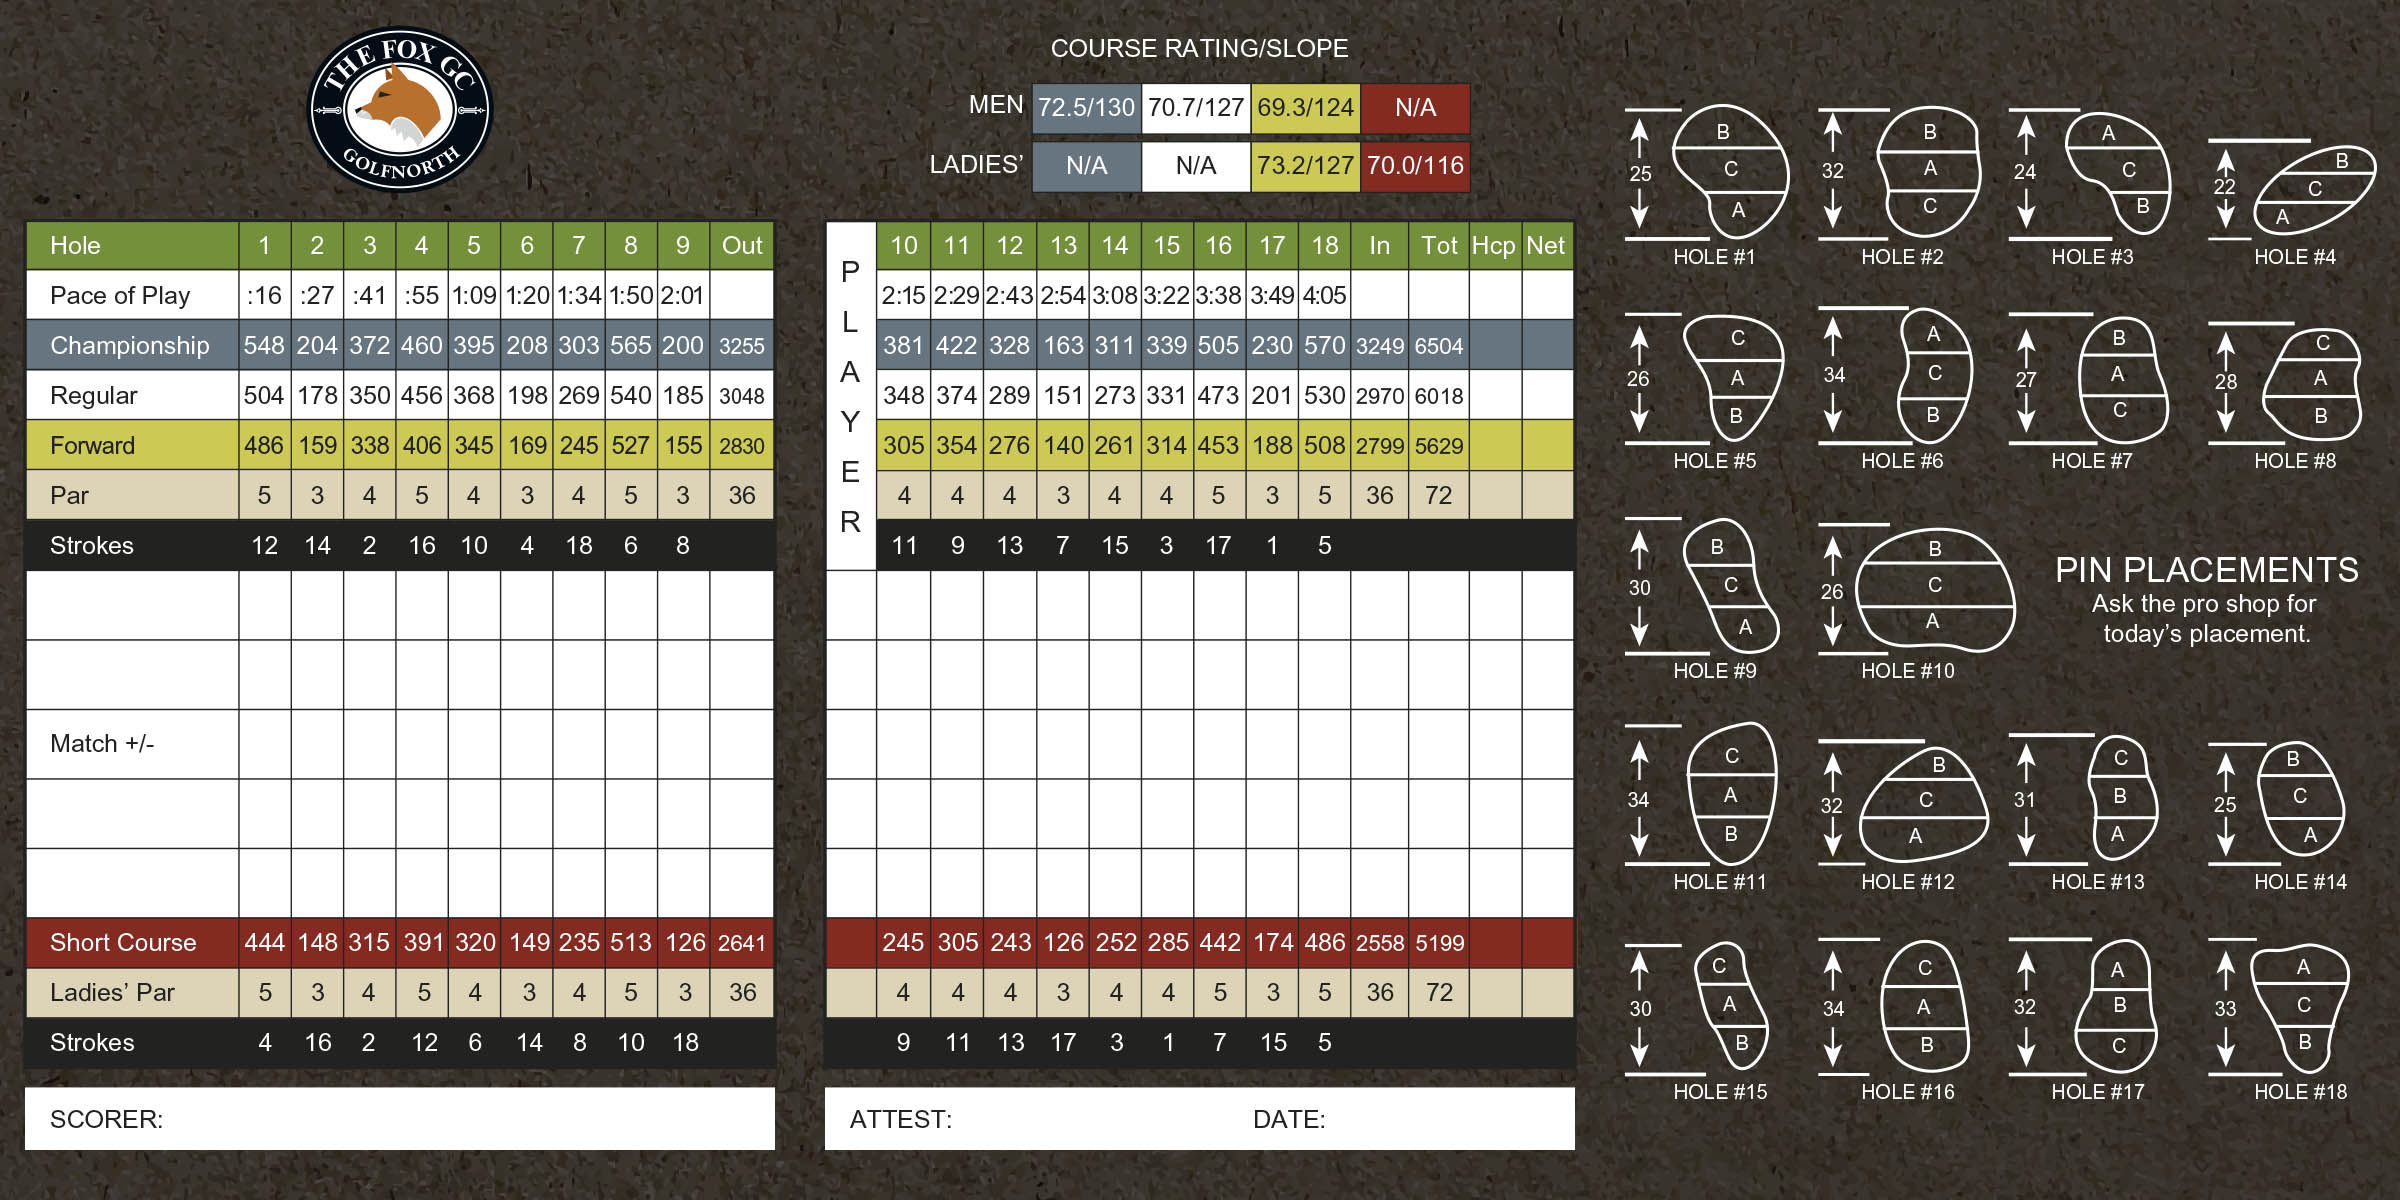 This is an image of The Fox Golf Club's scorecard. For those who are visually impaired, please call 1-888-833-8787 for a representative to verbally guide you through the scorecard details.